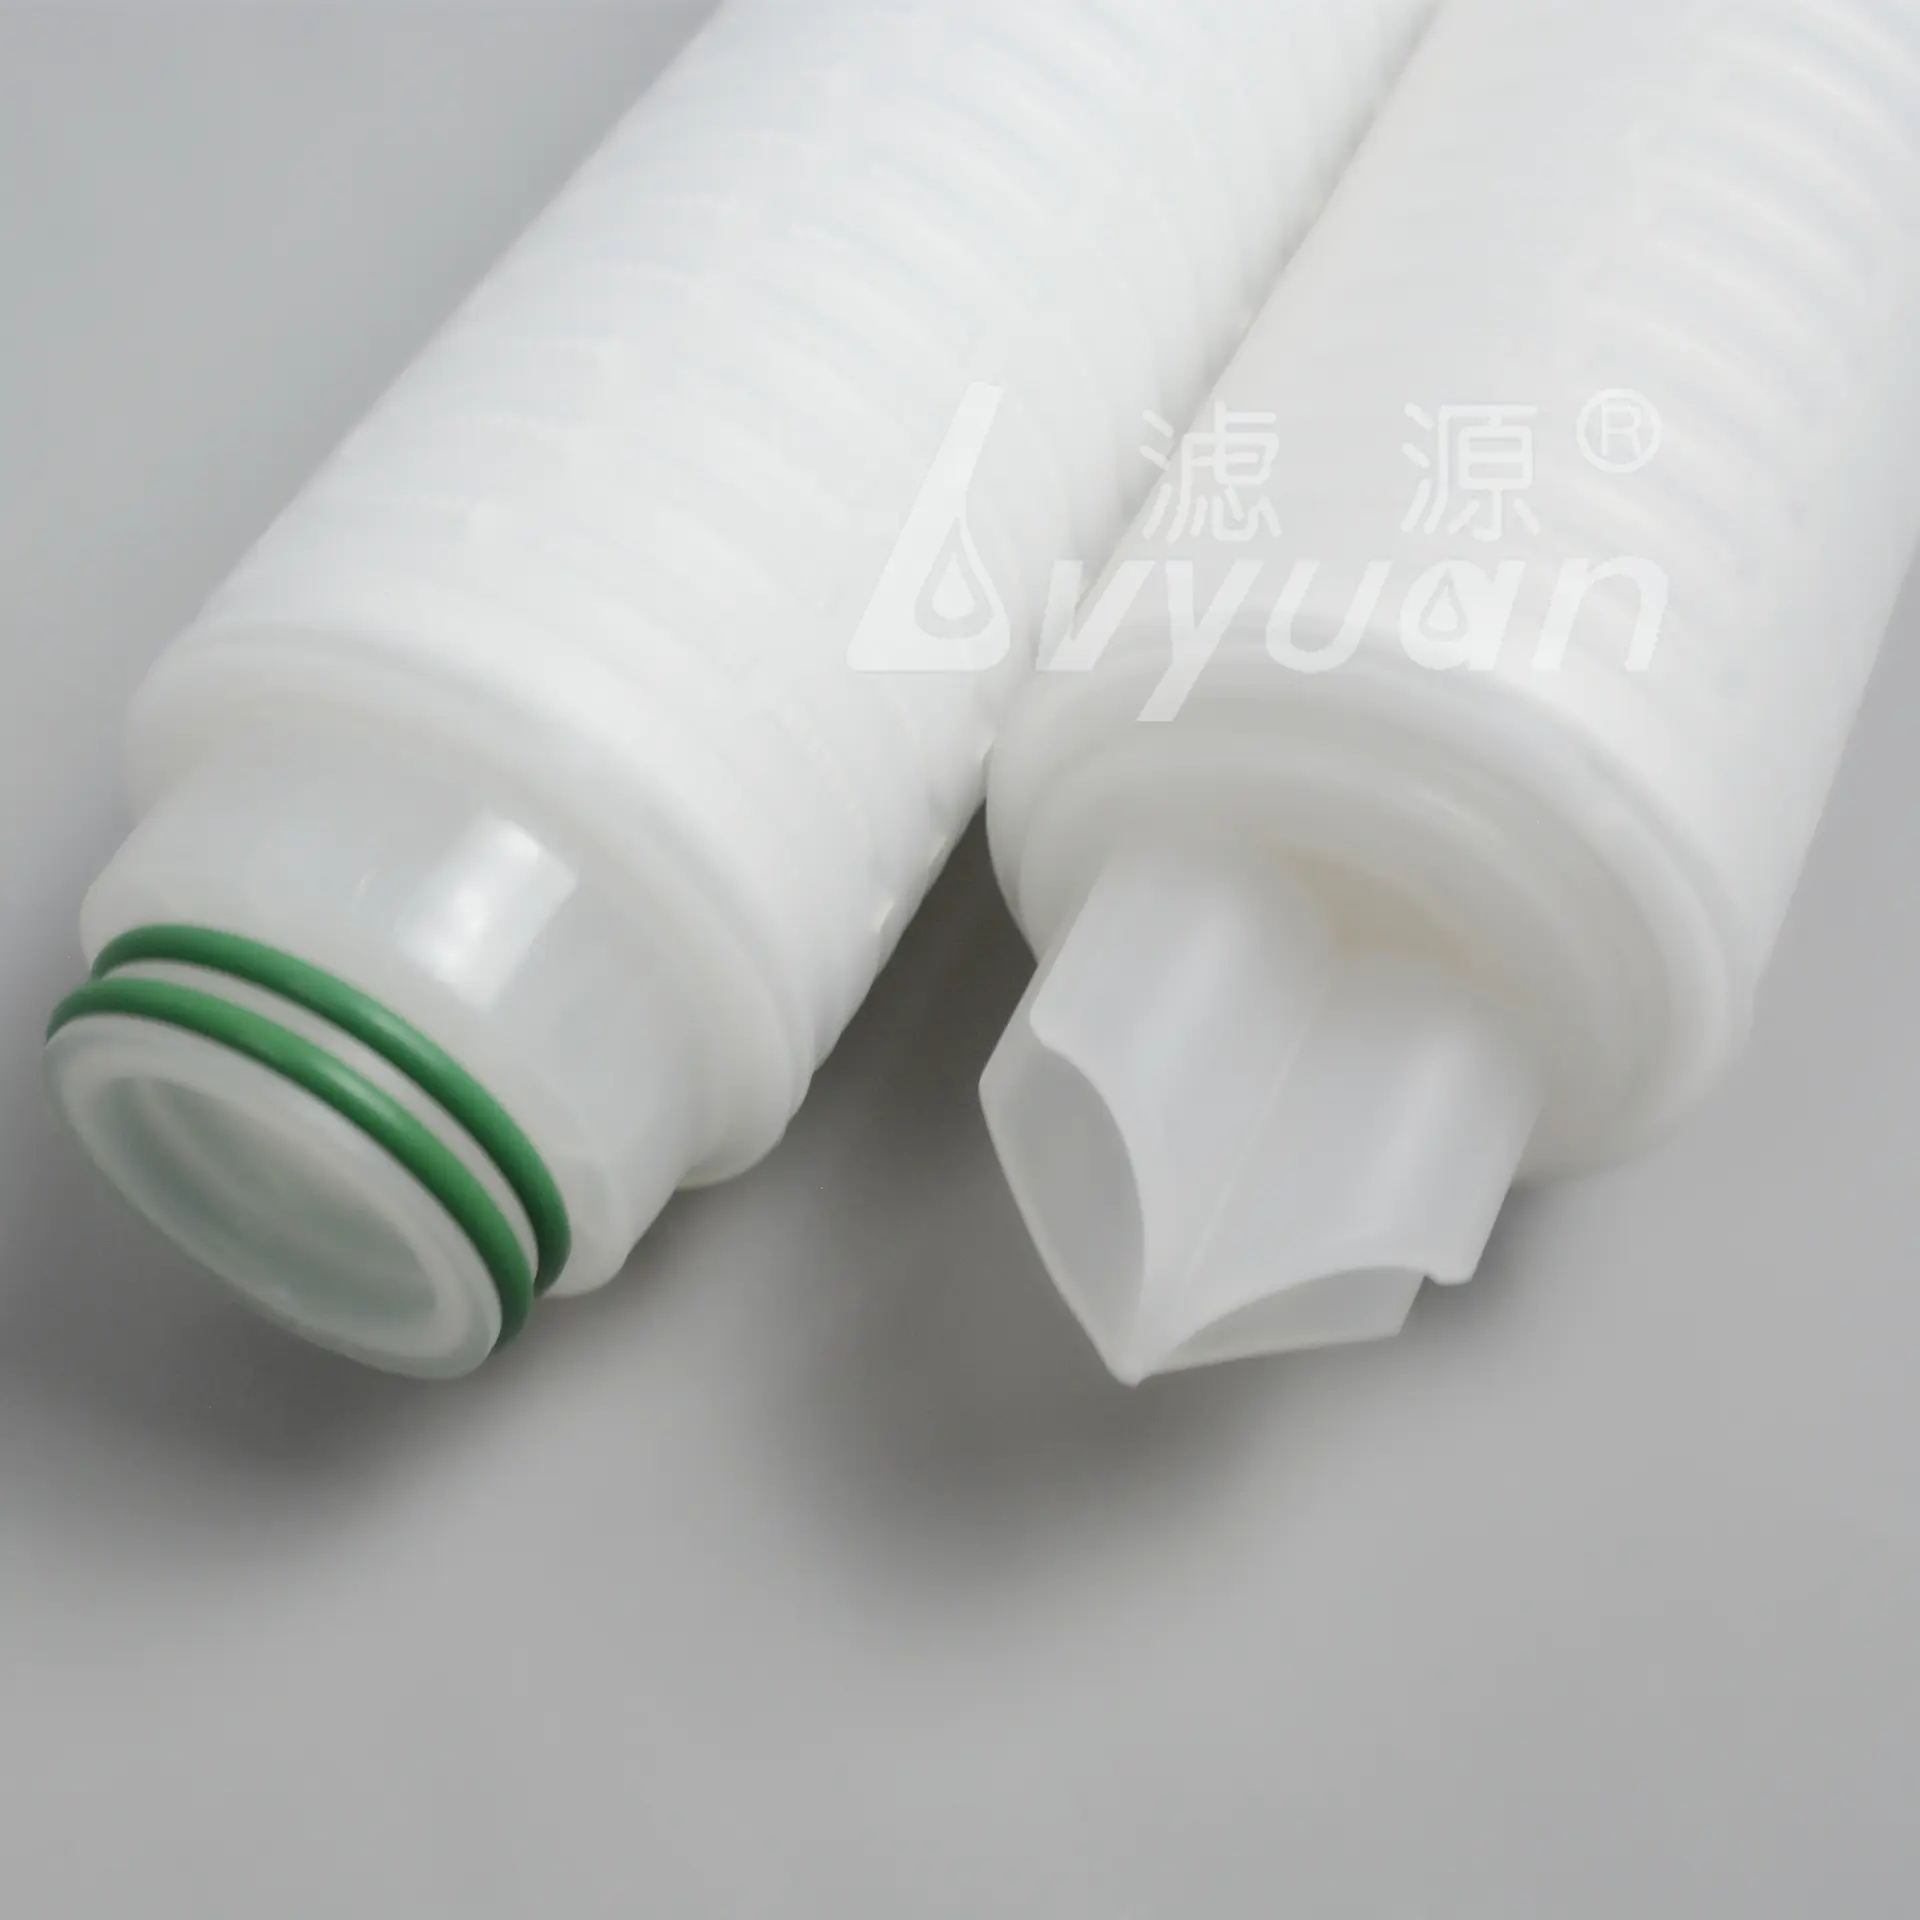 Good price 0.22 um pvdf membrane filter/pleated filter cartridge for beer/wine filtration